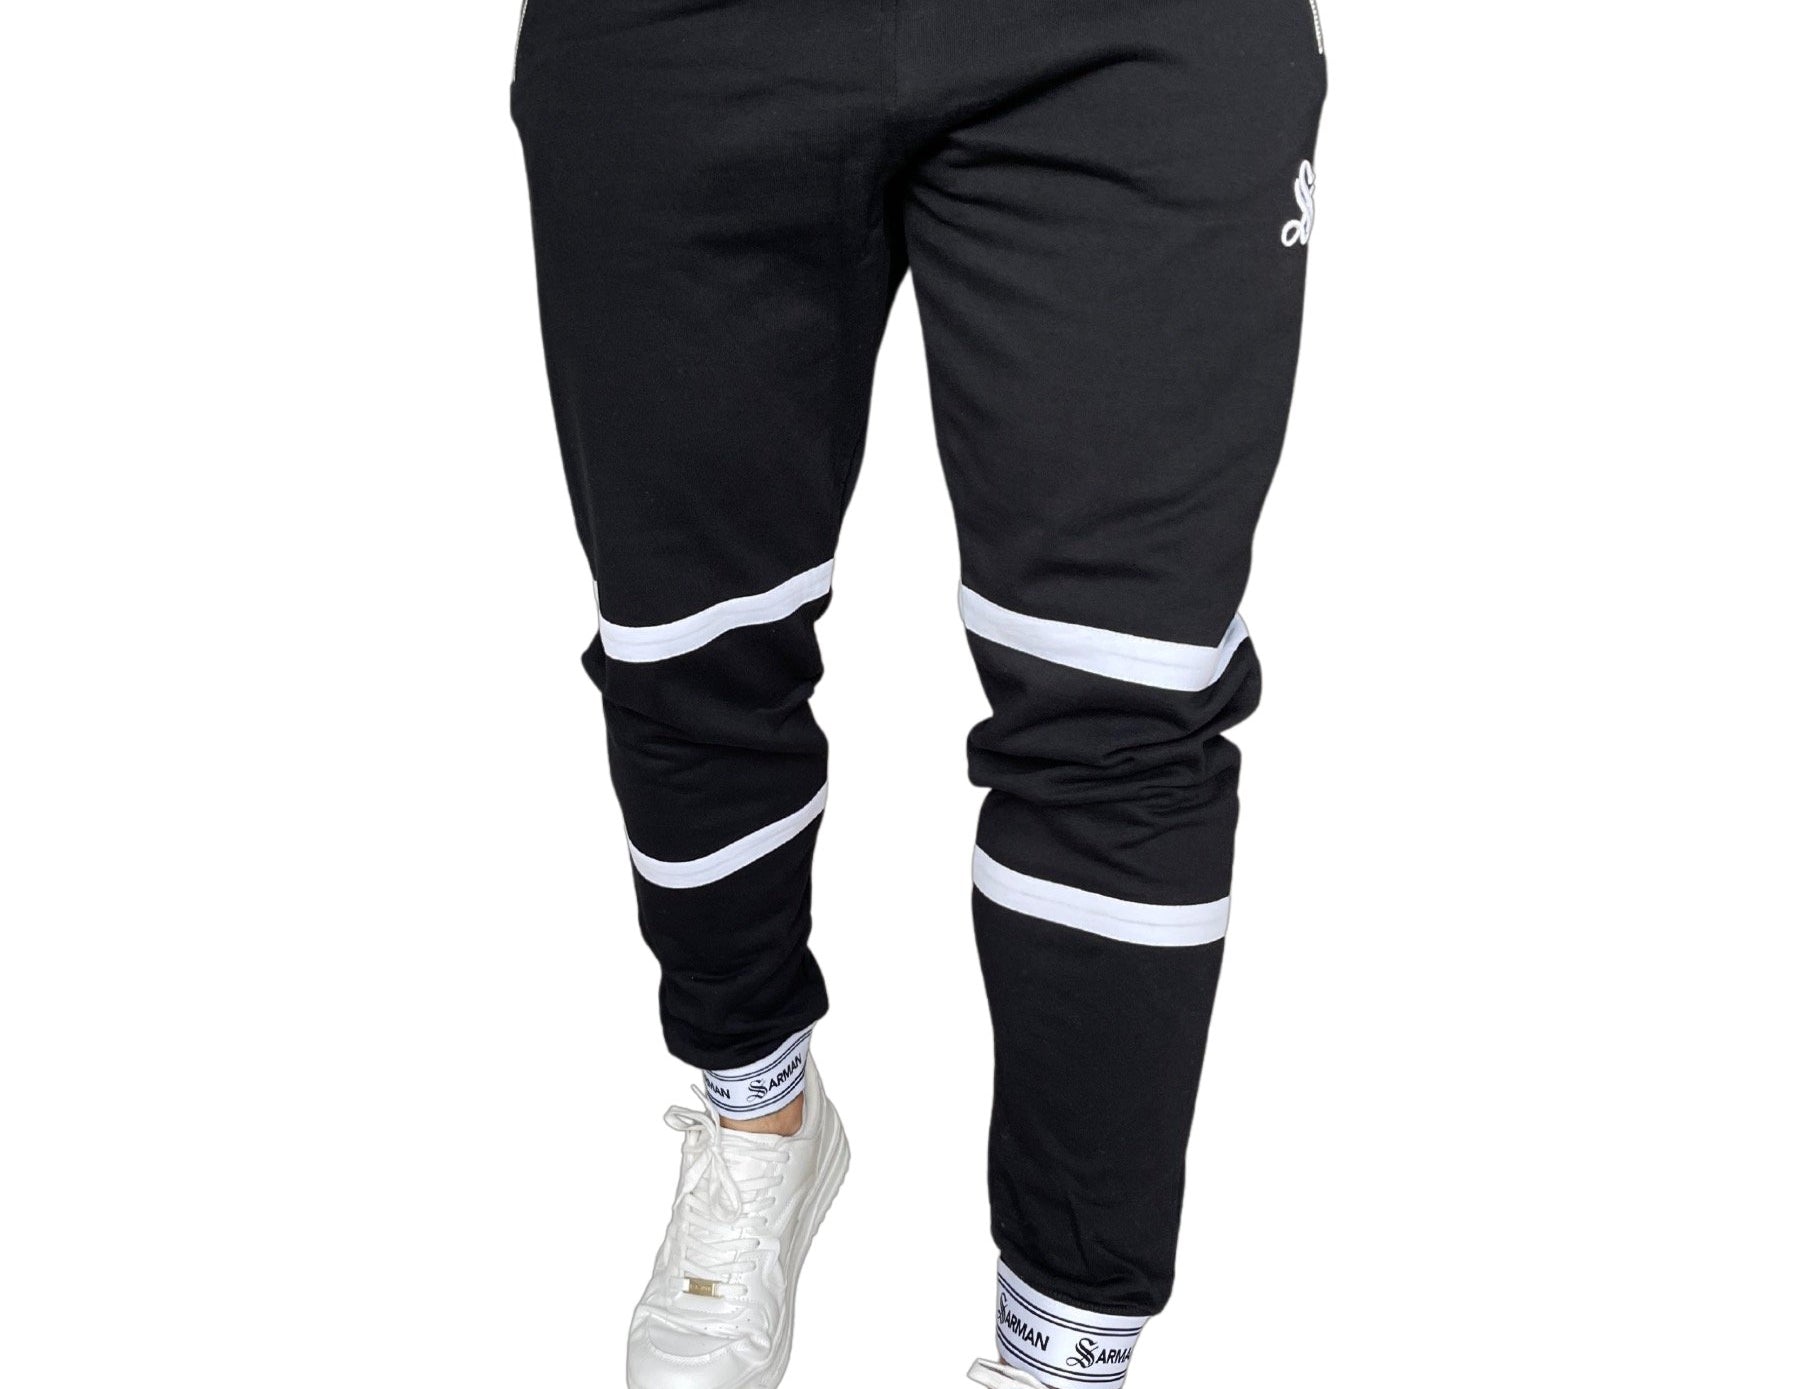 Time - Black/White Joggers for Men - Sarman Fashion - Wholesale Clothing Fashion Brand for Men from Canada